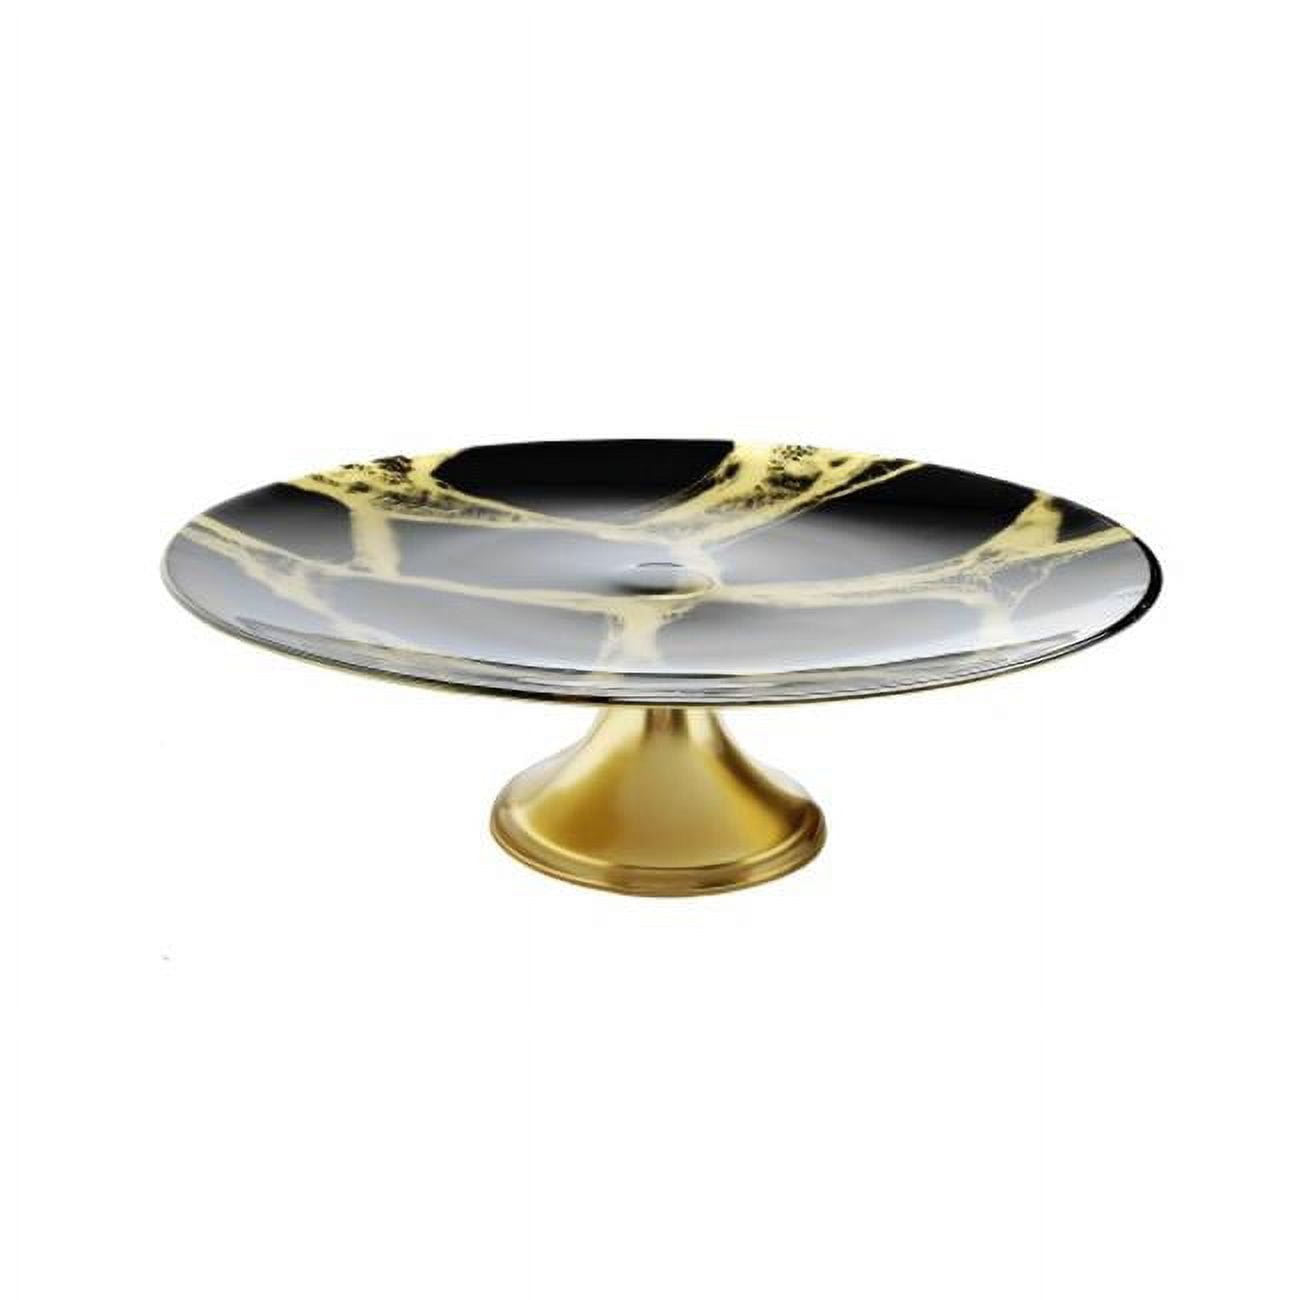 Classic Touch Mcp1082 Marbleized Footed Cake Stand, Black & Gold